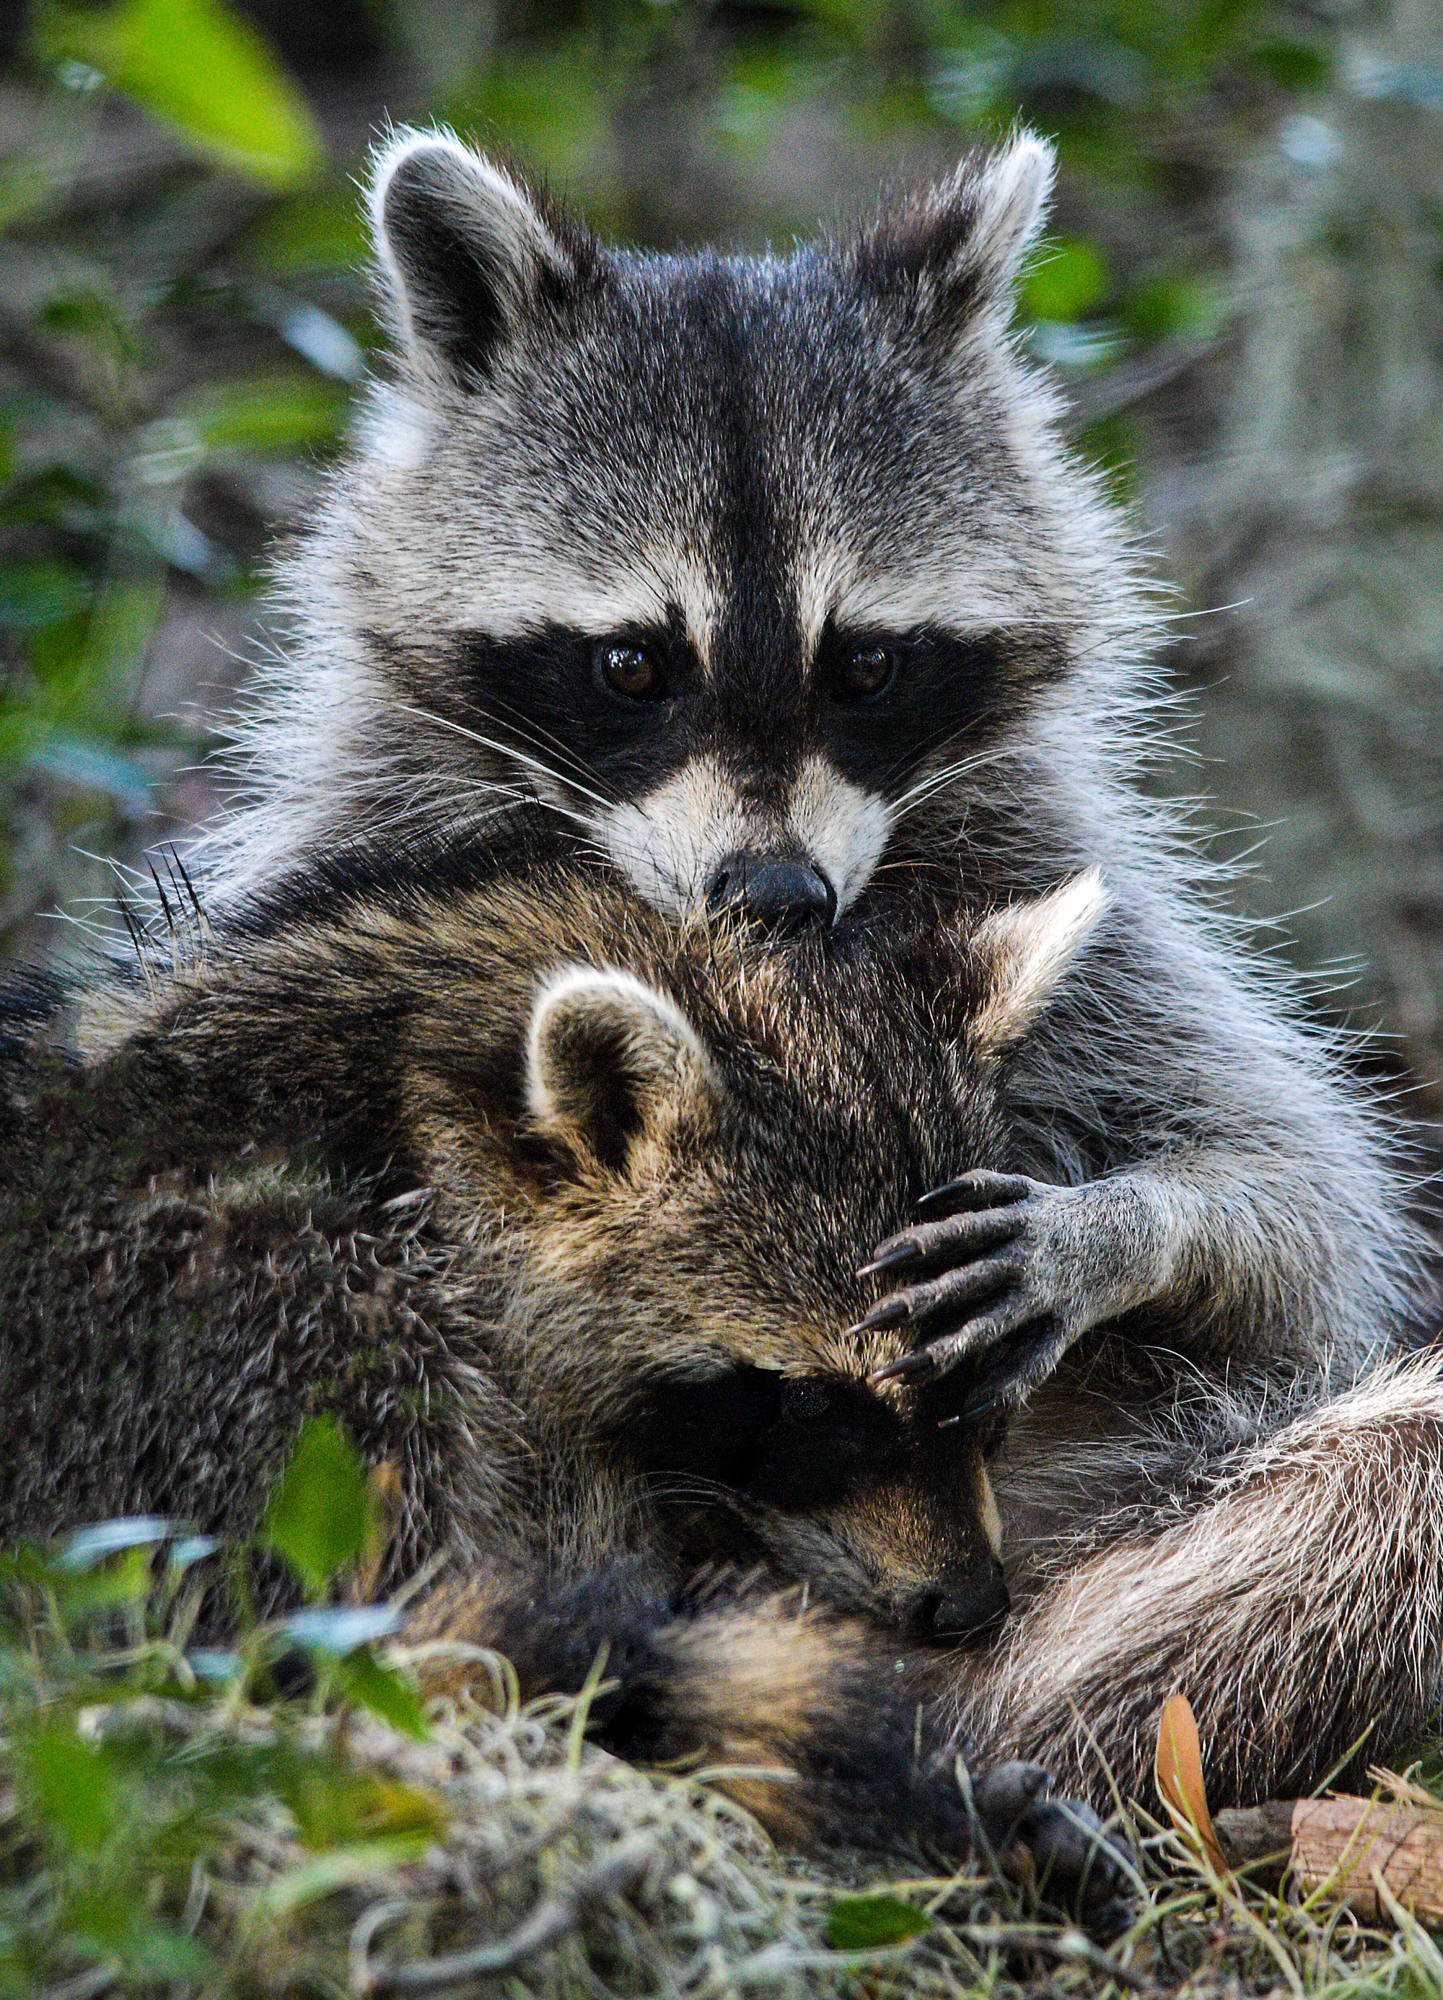 Unique wildlife sightings, such as this interaction between a raccoon and kit, are more easily spotted without disruption from a bike. (Miri Hardy photo)